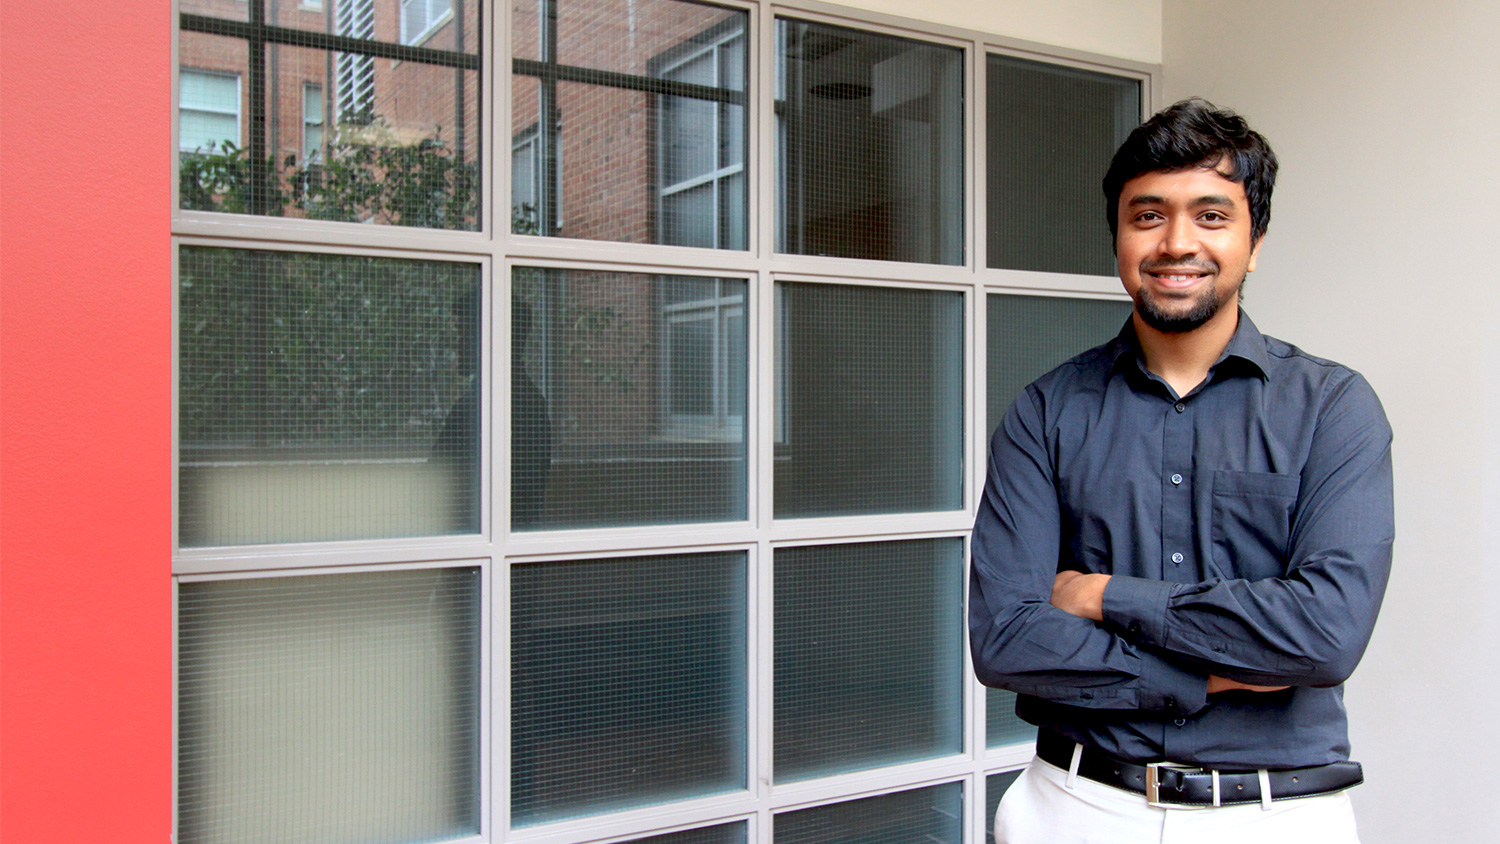 Rakesh Ravi, data scientist in the Center for Innovation Management Studies at the NC State Poole College of Management